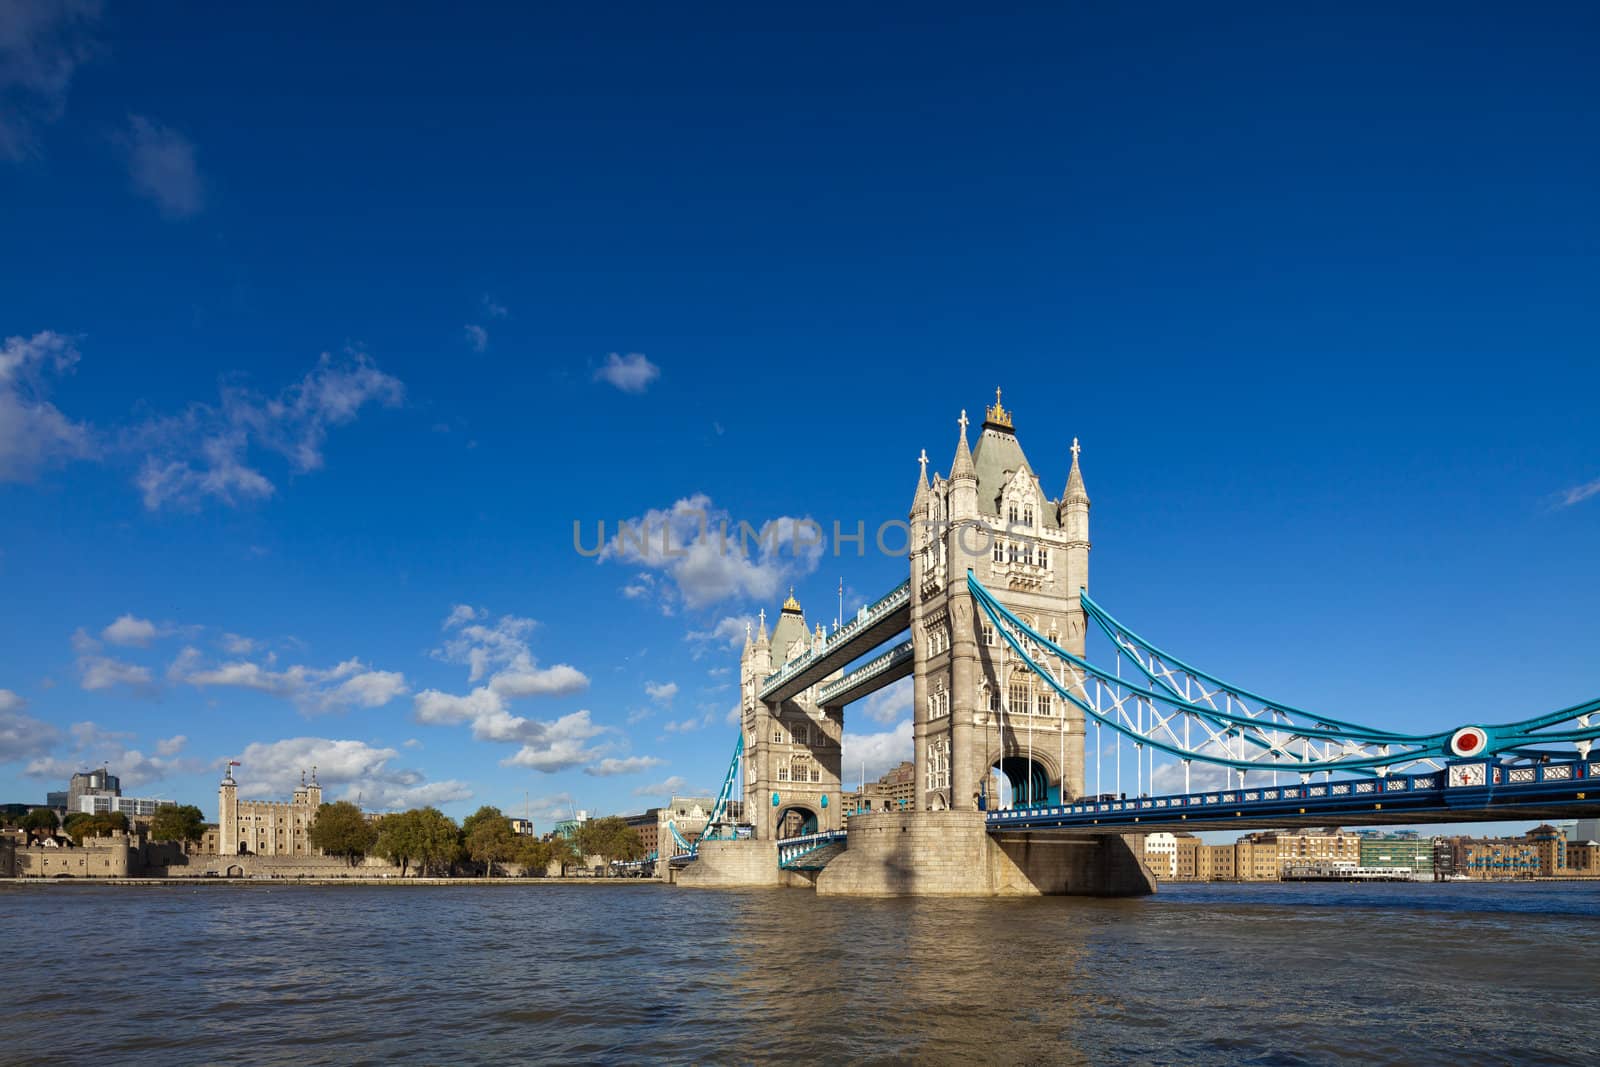 The famous Tower Bridge in London, UK by Antartis